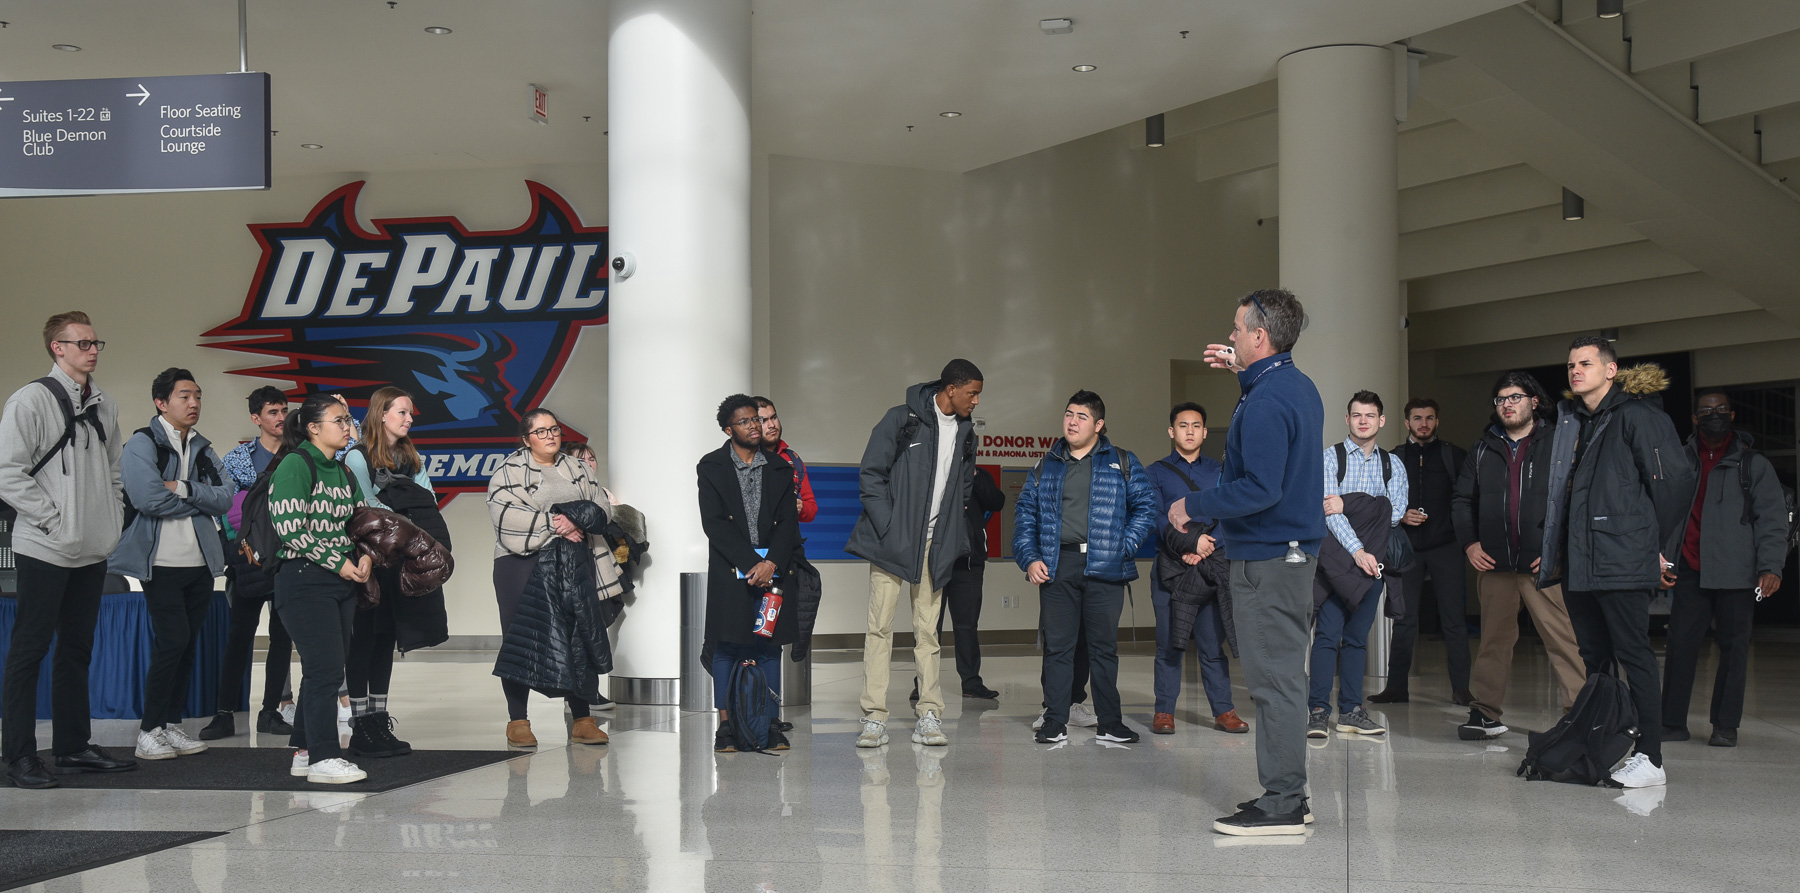 Friday morning the class headed south to Wintrust Arena and a tour with Arena Manager David Kennedy.